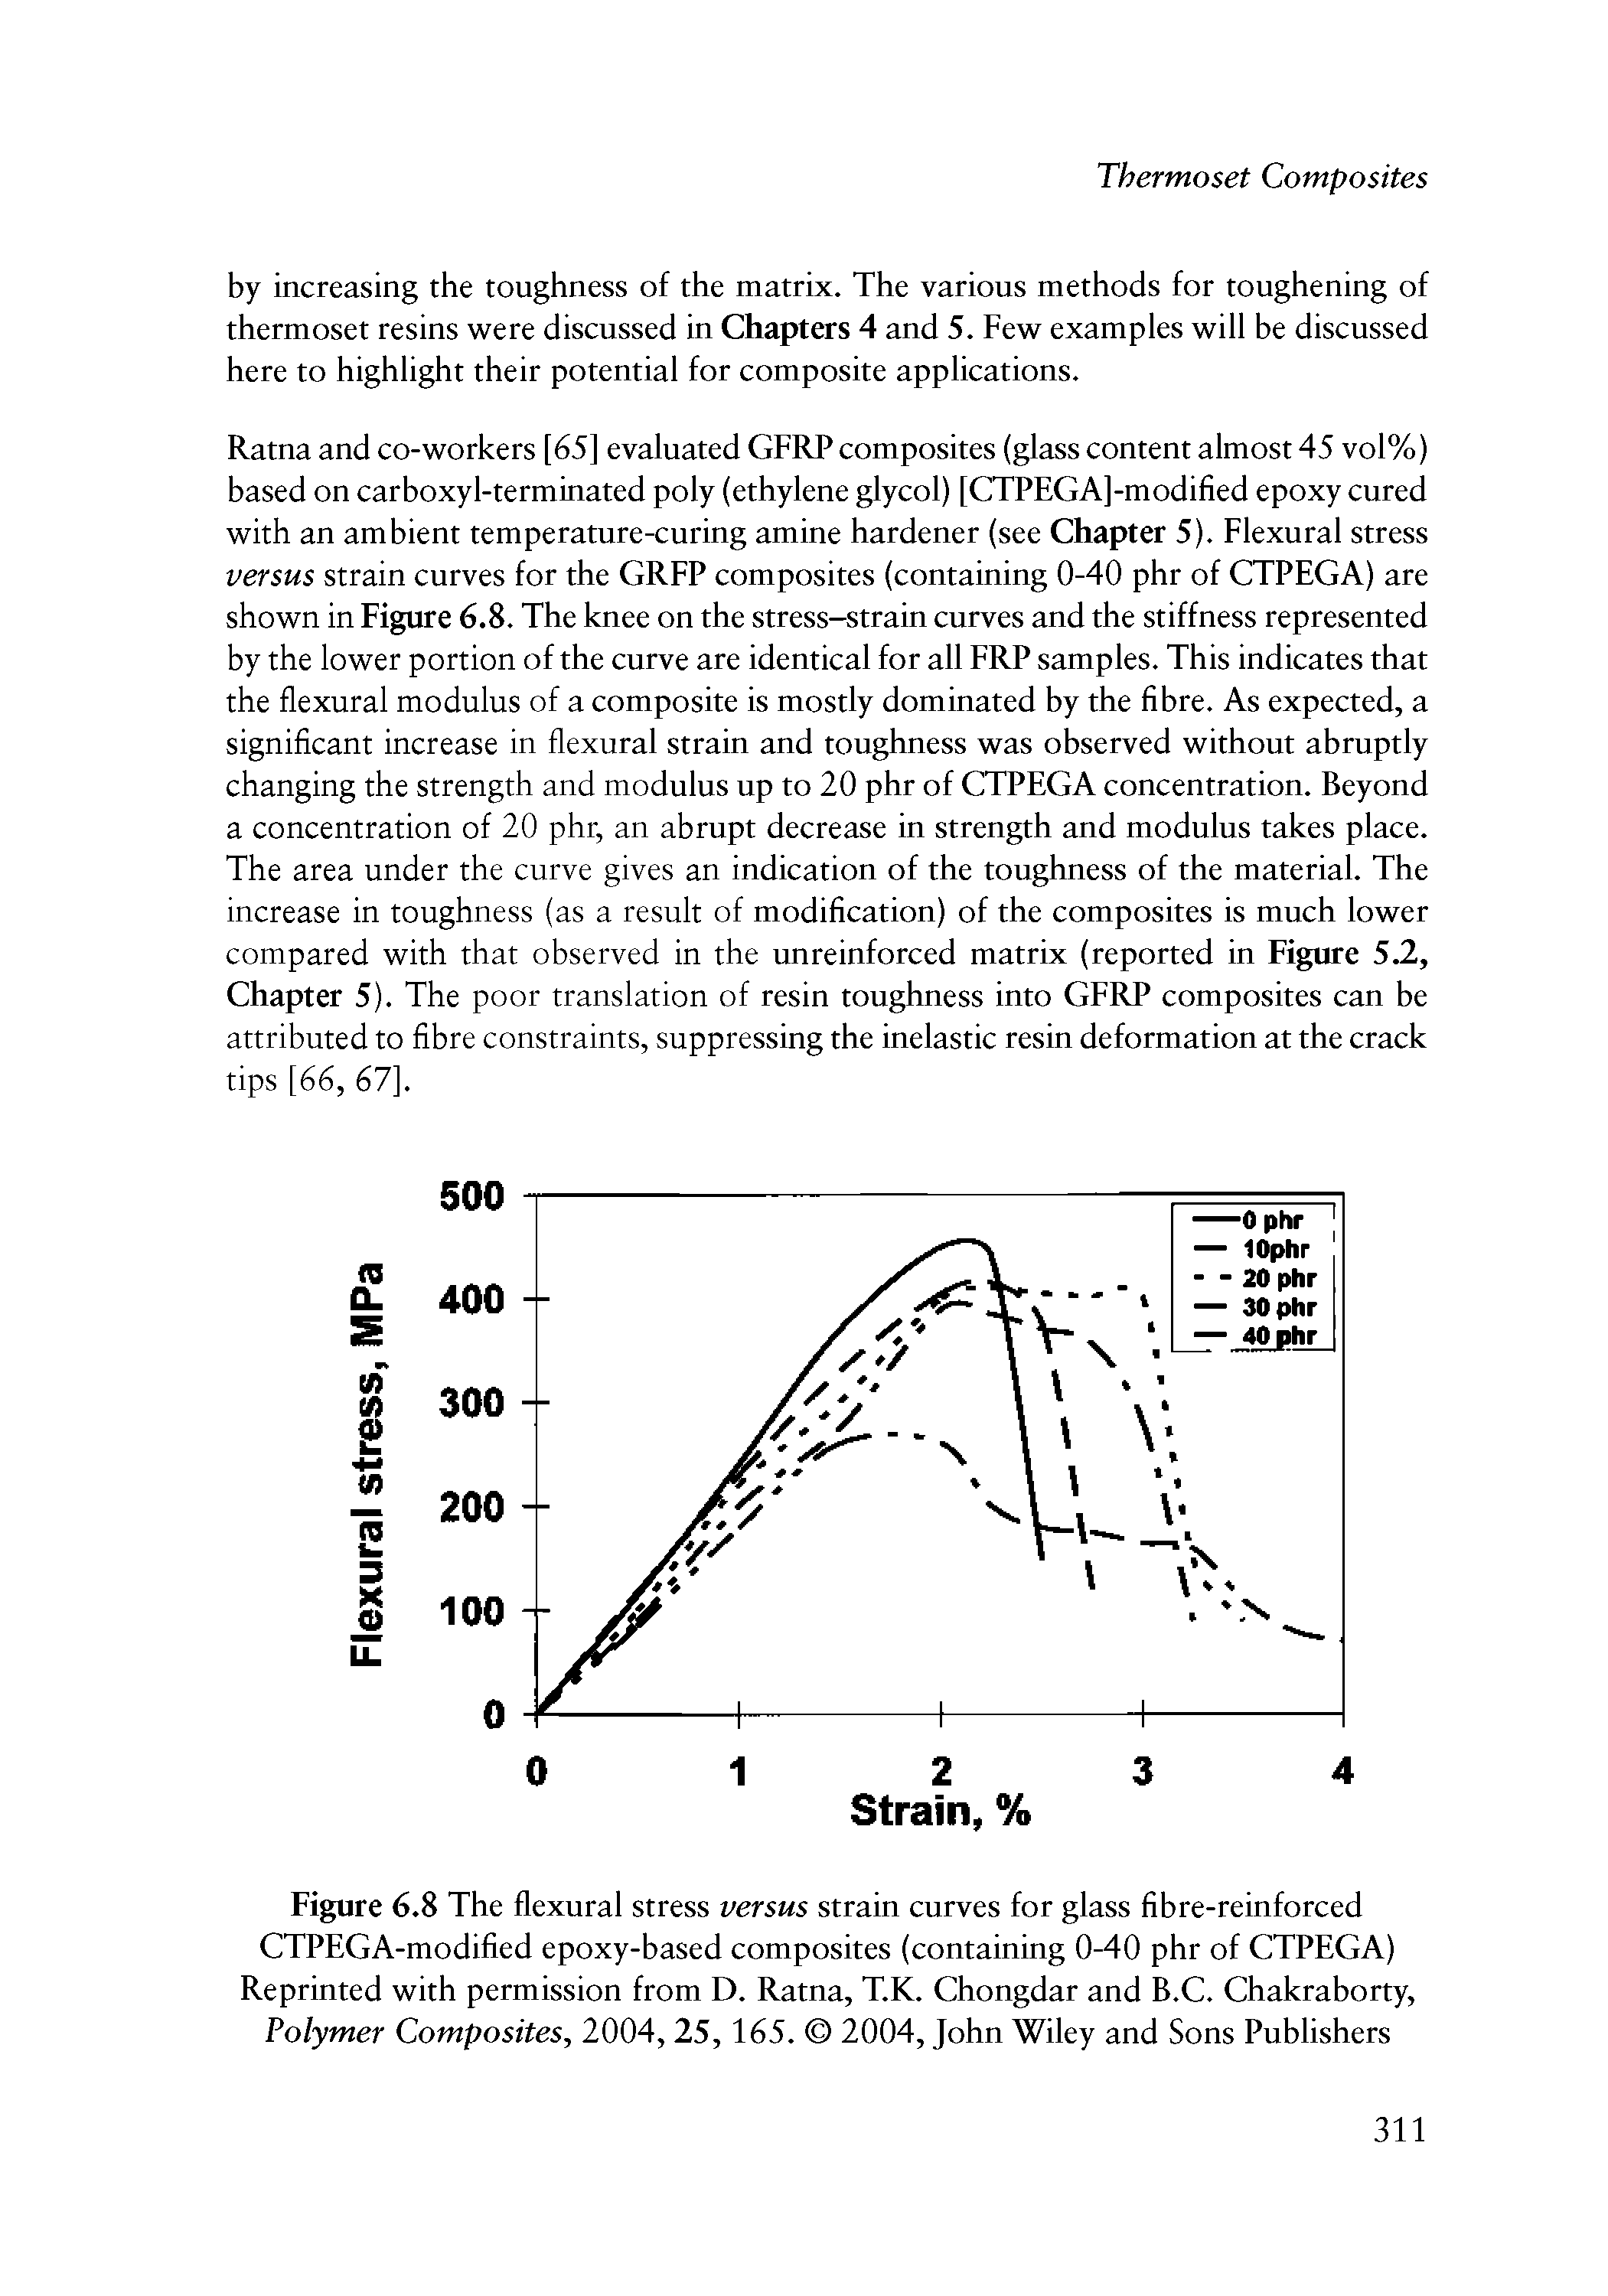 Figure 6.8 The flexural stress versus strain curves for glass fibre-reinforced CTPEGA-modified epoxy-based composites (containing 0-40 phr of CTPEGA) Reprinted with permission from D. Ratna, T.K. Chongdar and B.C. Ghakrahorty, Polymer Composites, 2004,25,165. 2004, John Wiley and Sons Publishers...